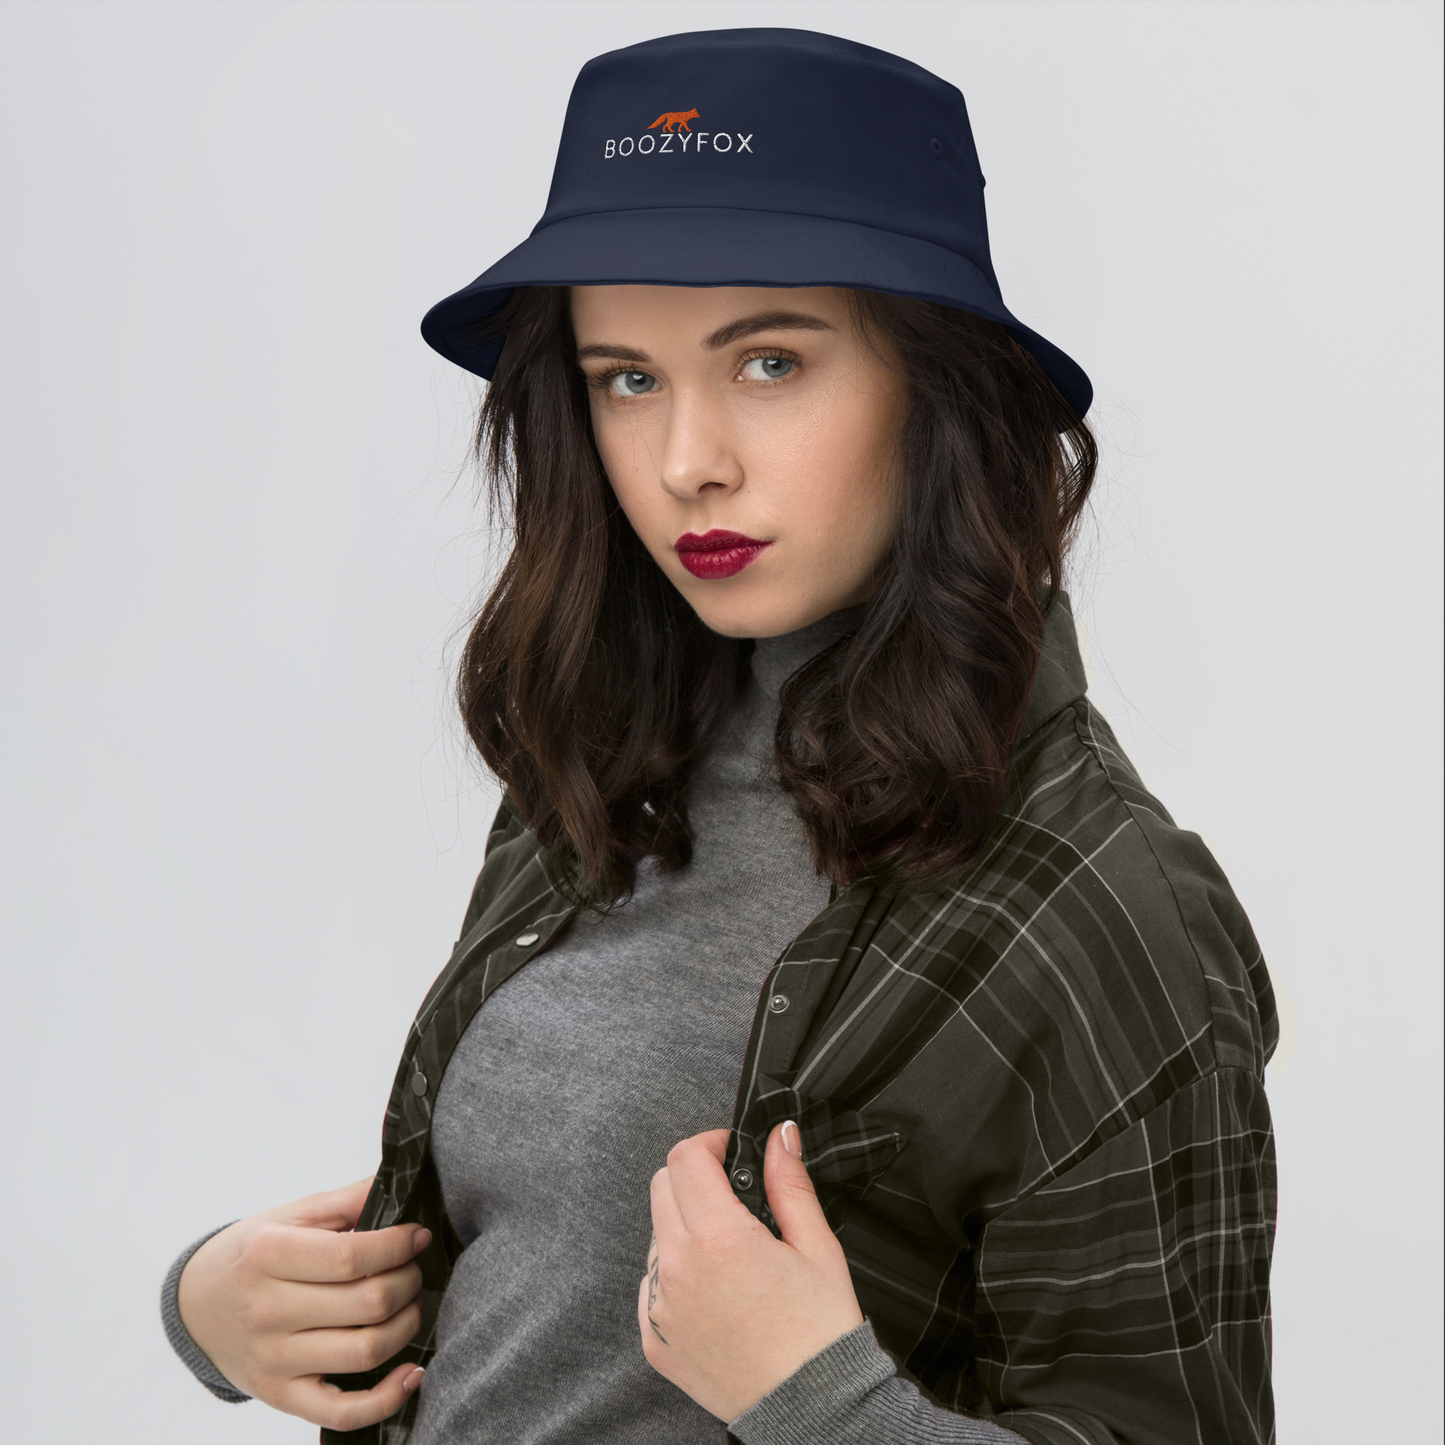 Woman wearing a Cool Navy Bucket Hat featuring a striking embroidered Boozy Fox logo on front. Shop Cool Sun Protection Bucket Hats And Wide Brim Hats Online - Boozy Fox